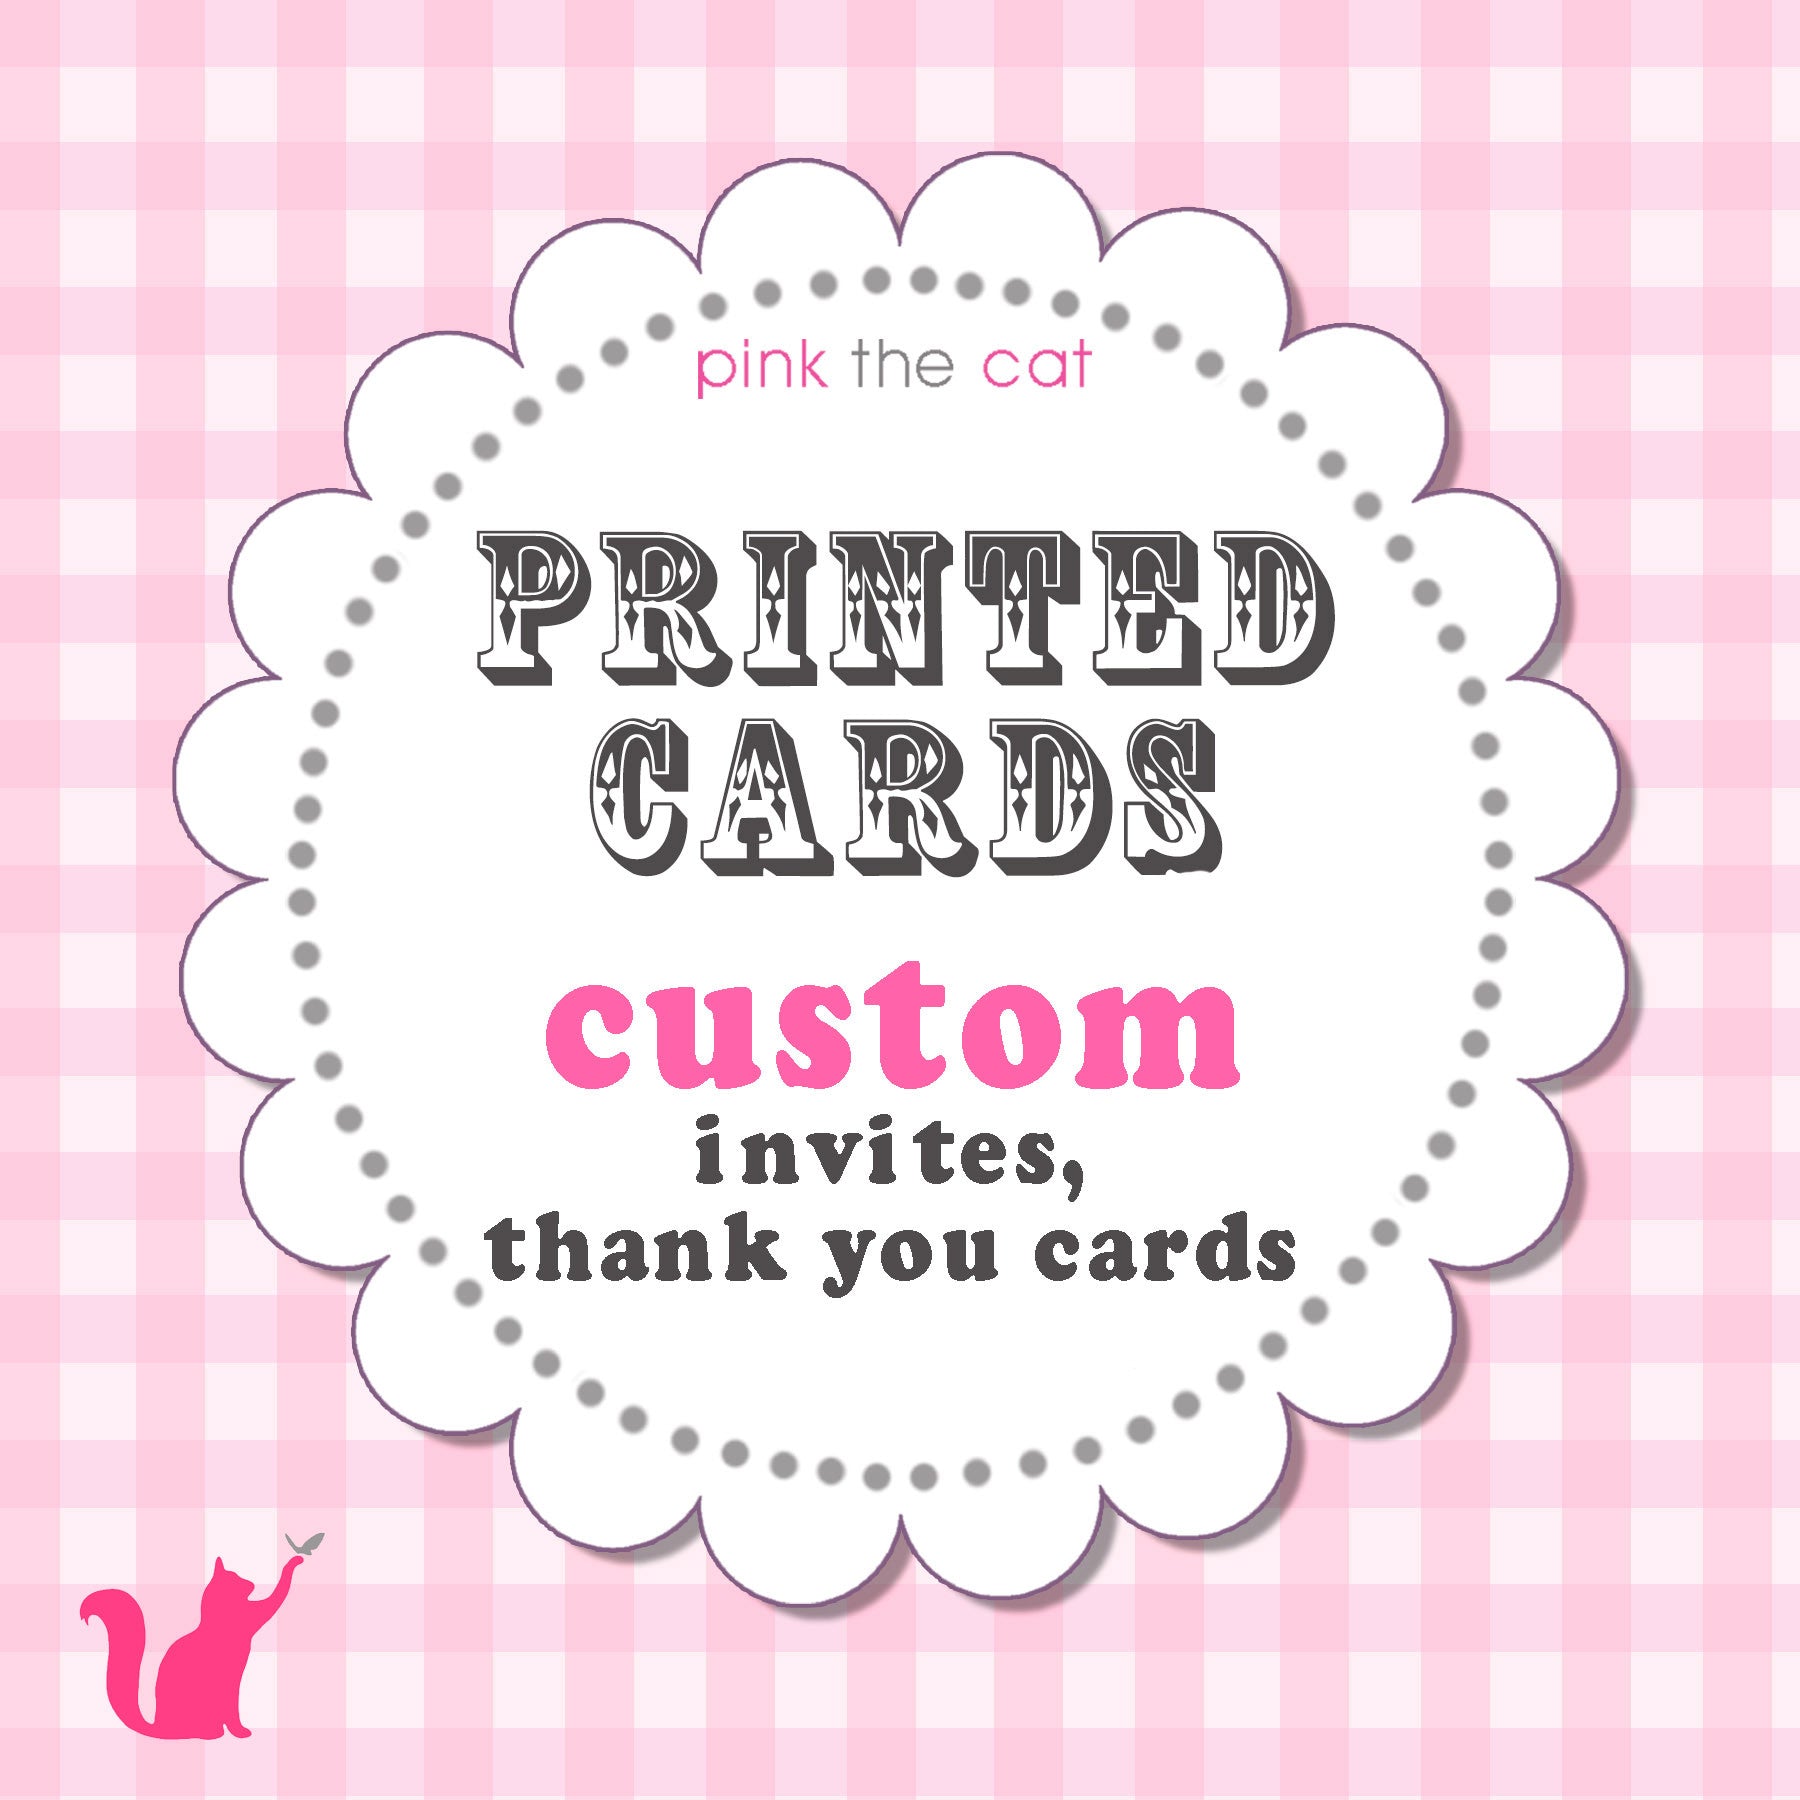 Printed Invitations or Thank You Cards Card Stock + Envelopes